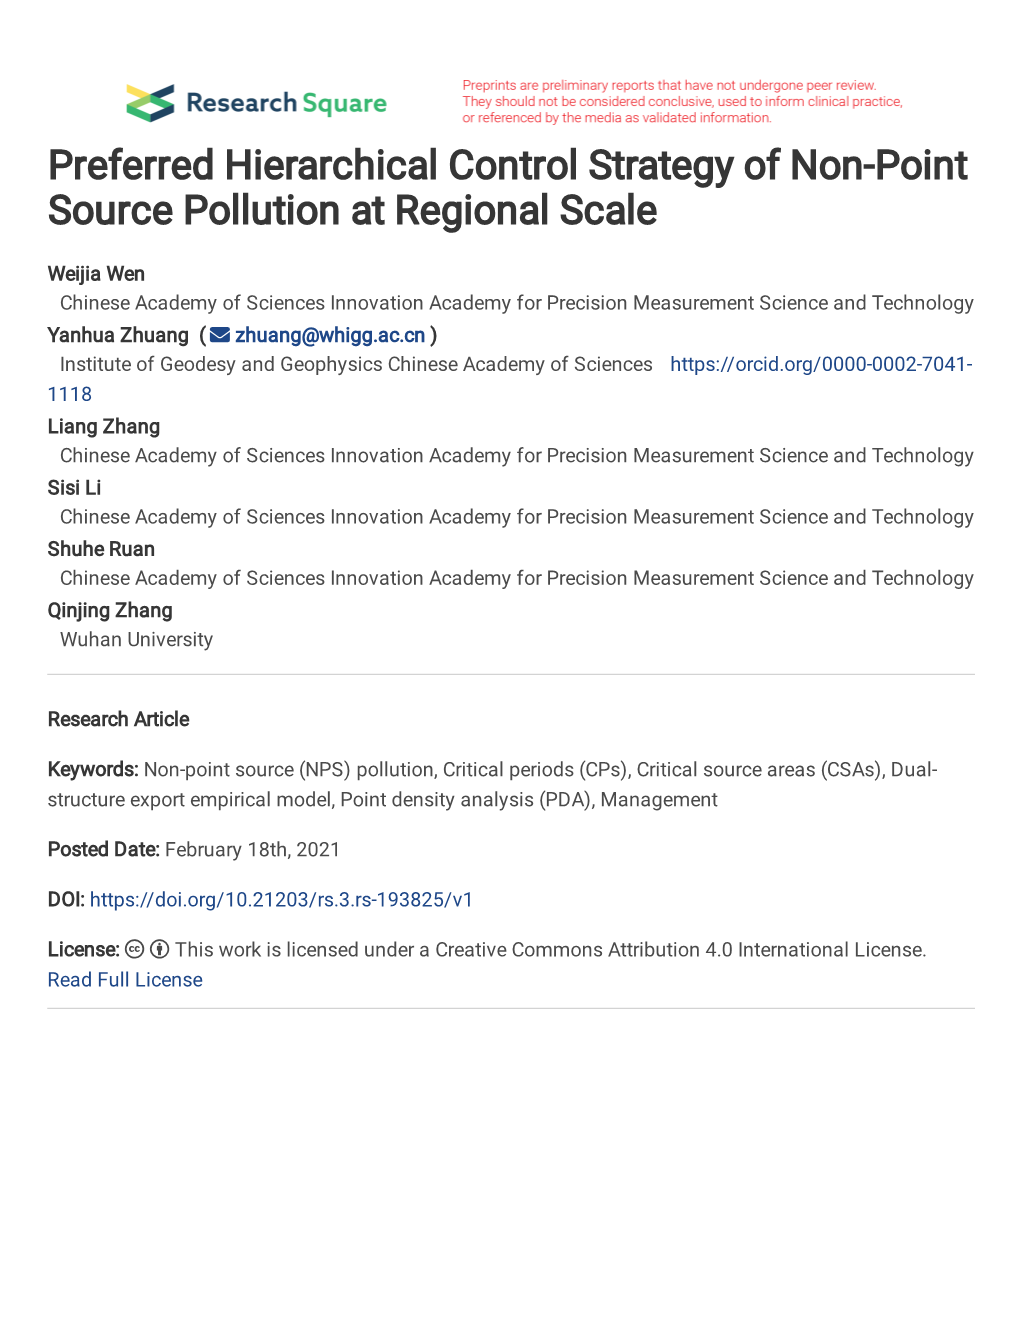 Preferred Hierarchical Control Strategy of Non-Point Source Pollution at Regional Scale